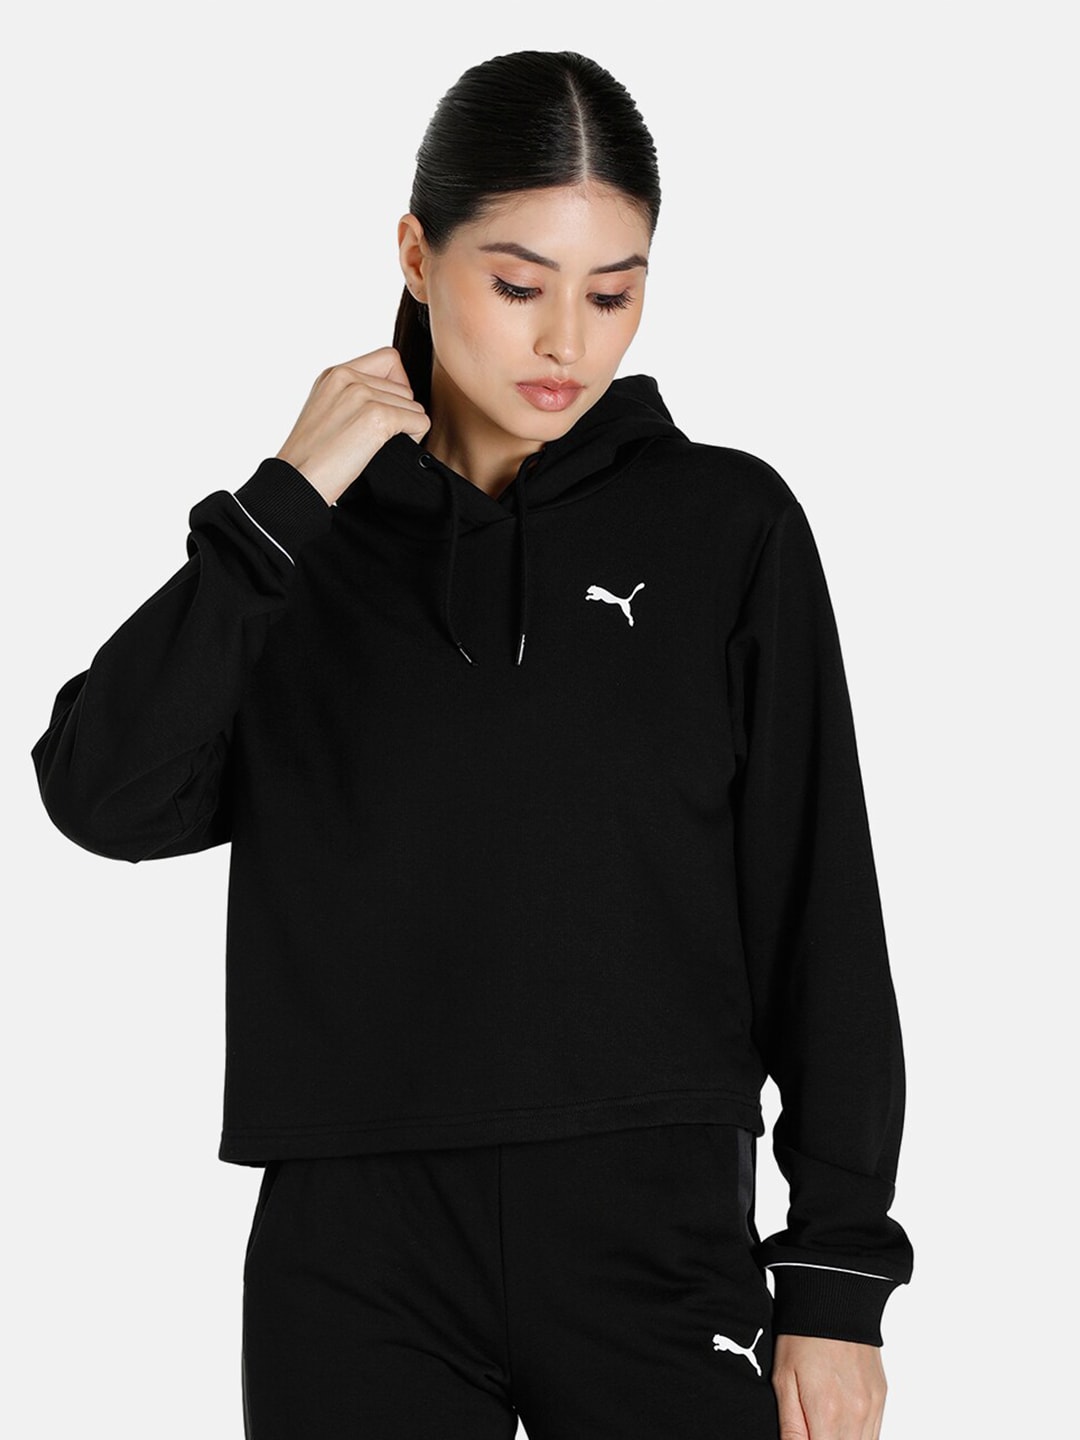 Puma Women Black Solid Relaxed Fit Hooded Sweatshirt Price in India